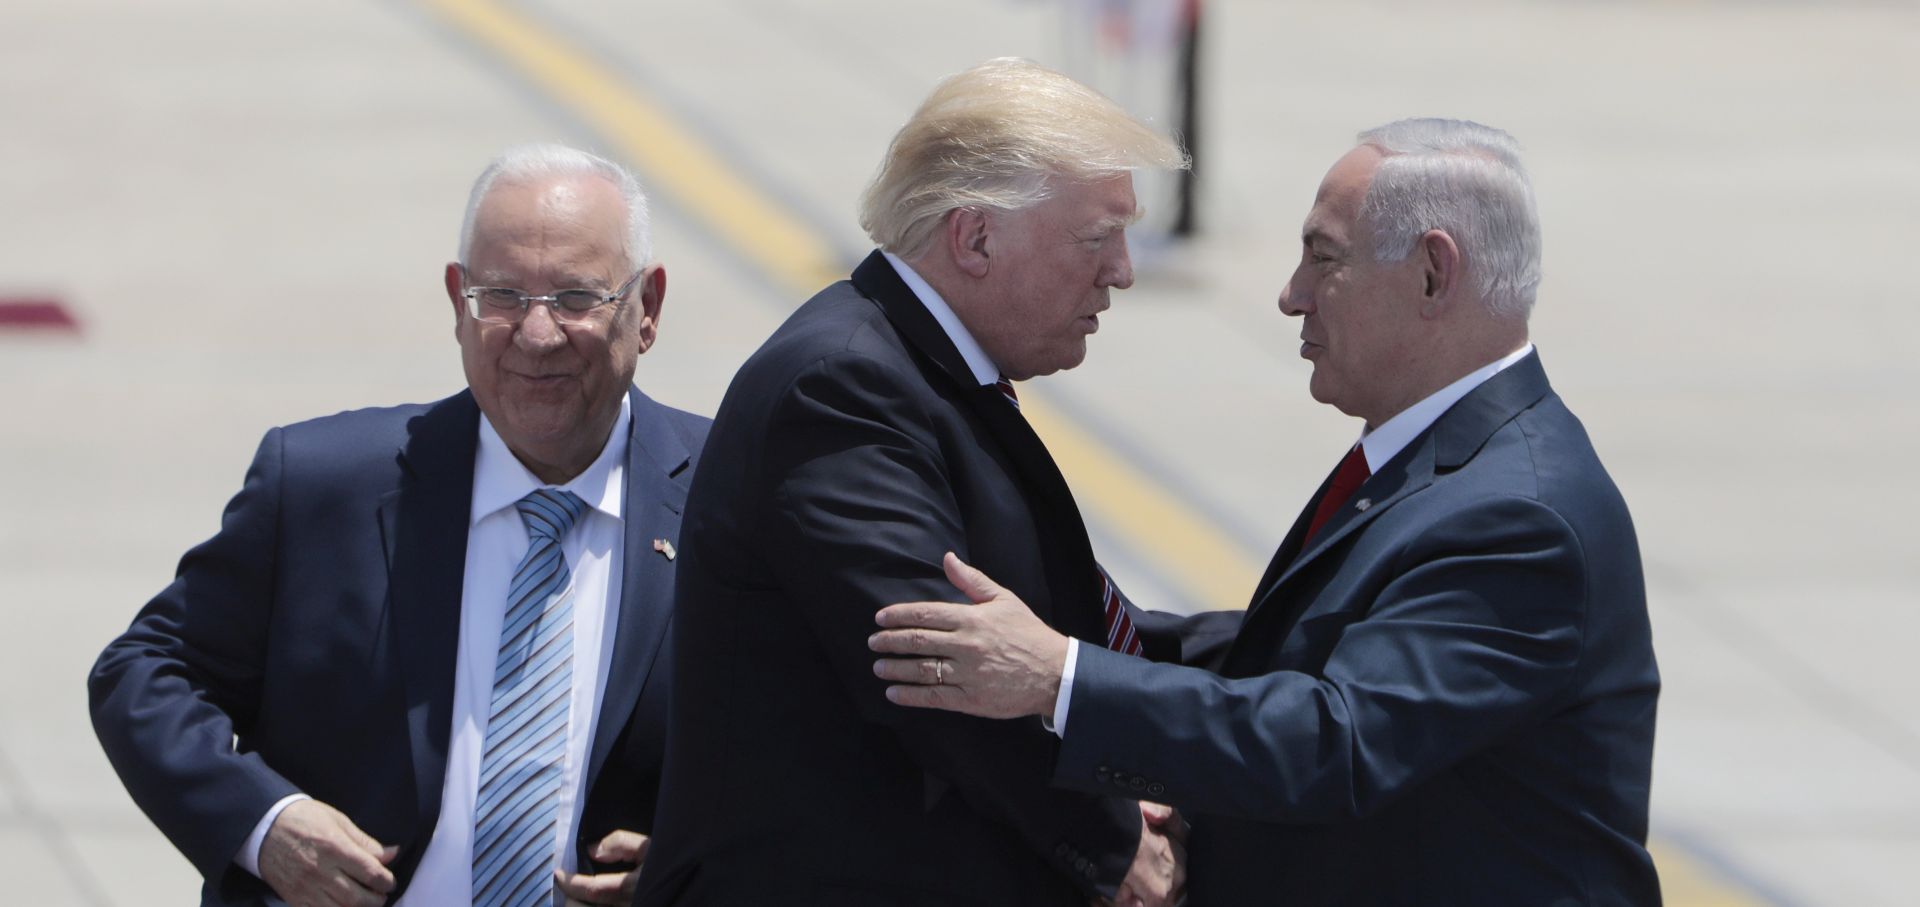 epa05981012 Israeli Prime Minister Benjamin Netanyahu (R) greets US President Donald J. Trump (C) next to Israeli President Reuven Rivlin (L) during a welcoming ceremony at Ben Gurion Airport in Lod, outside Tel Aviv, Israel, 22 May 2017. Trump arrived for a 28-hour visit to Israel and the Palestinian Authority areas on his first foreign trip since taking office in January.  EPA/JIM HOLLANDER